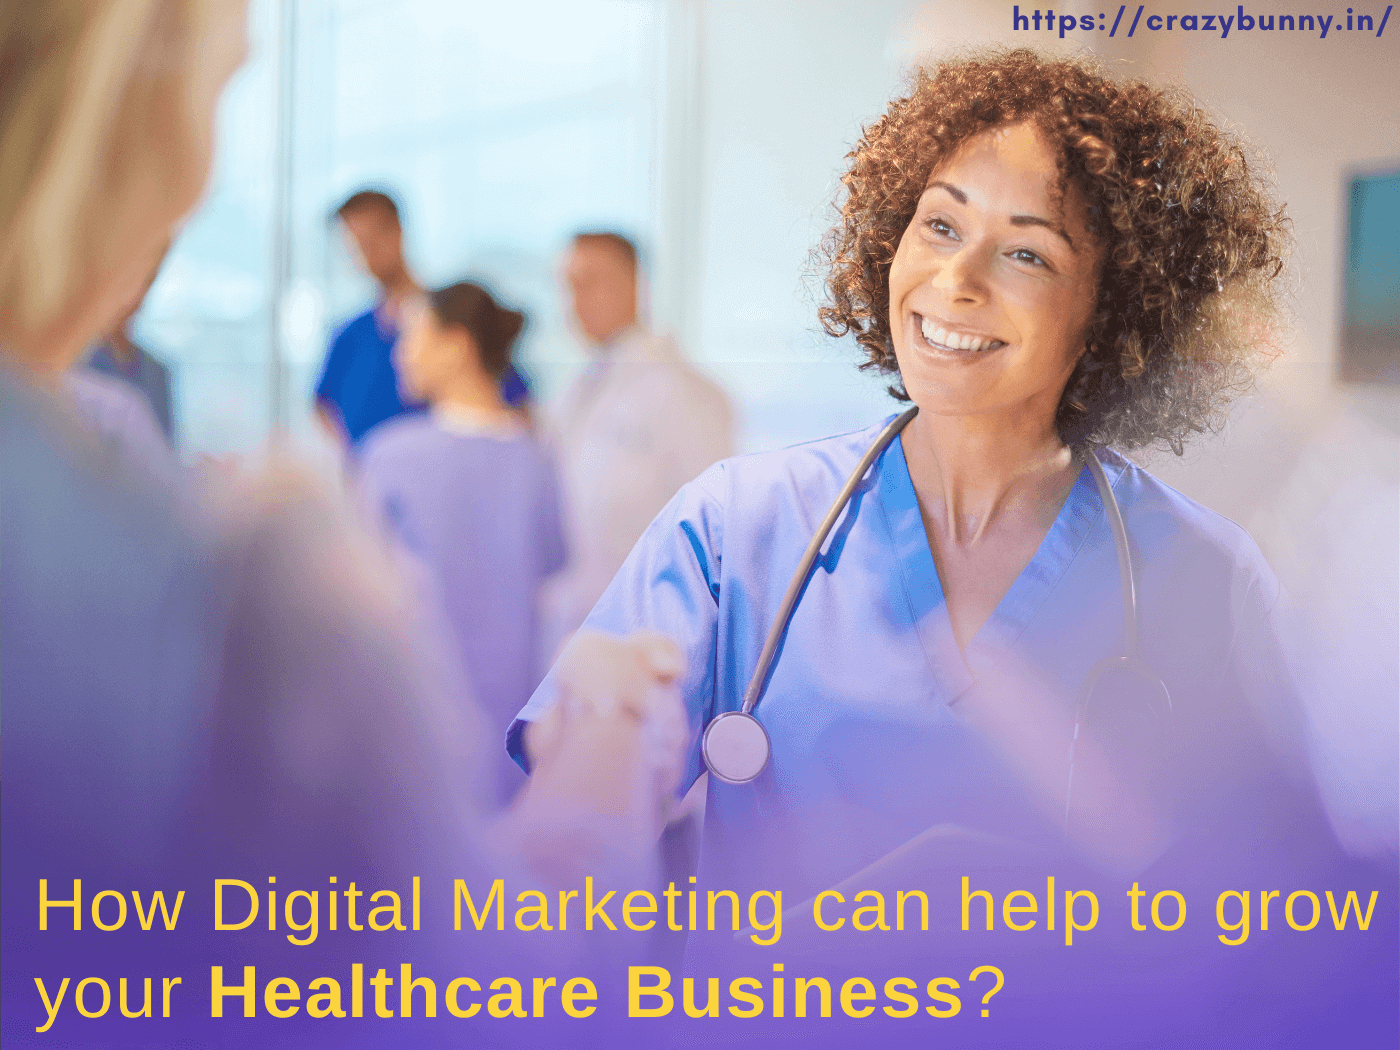 How Digital Marketing can help to grow your healthcare business?